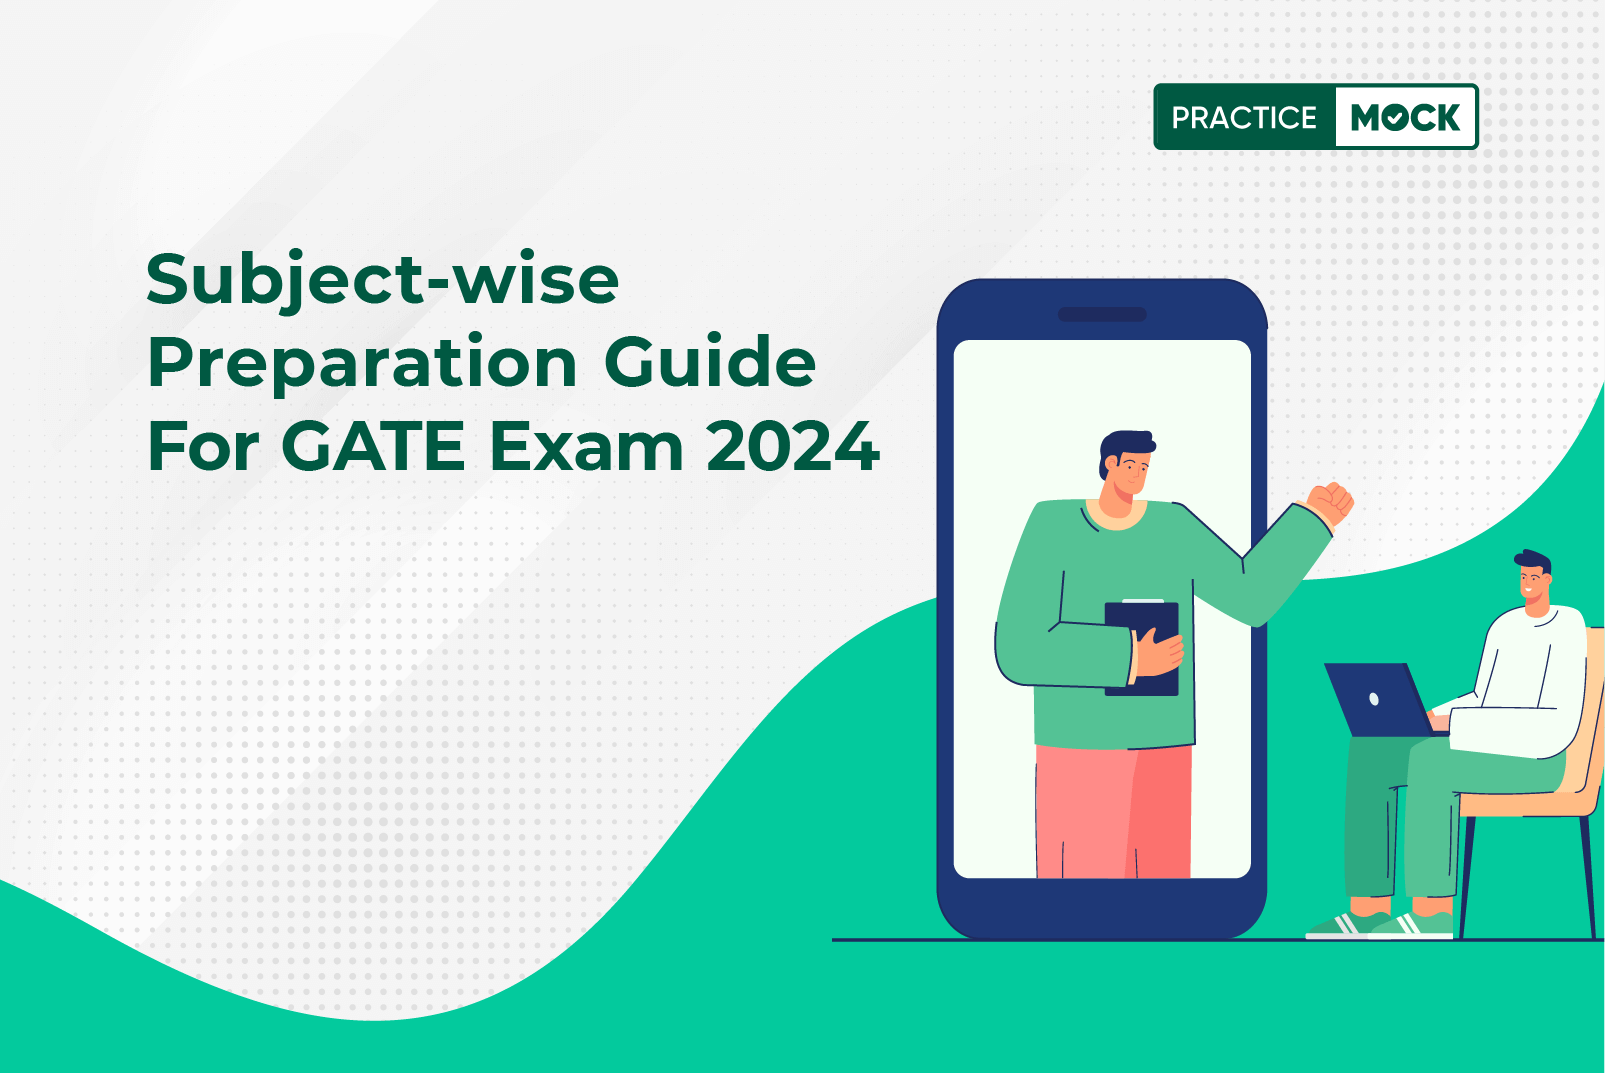 Subject-wise preparation guide for GATE Exam 2024